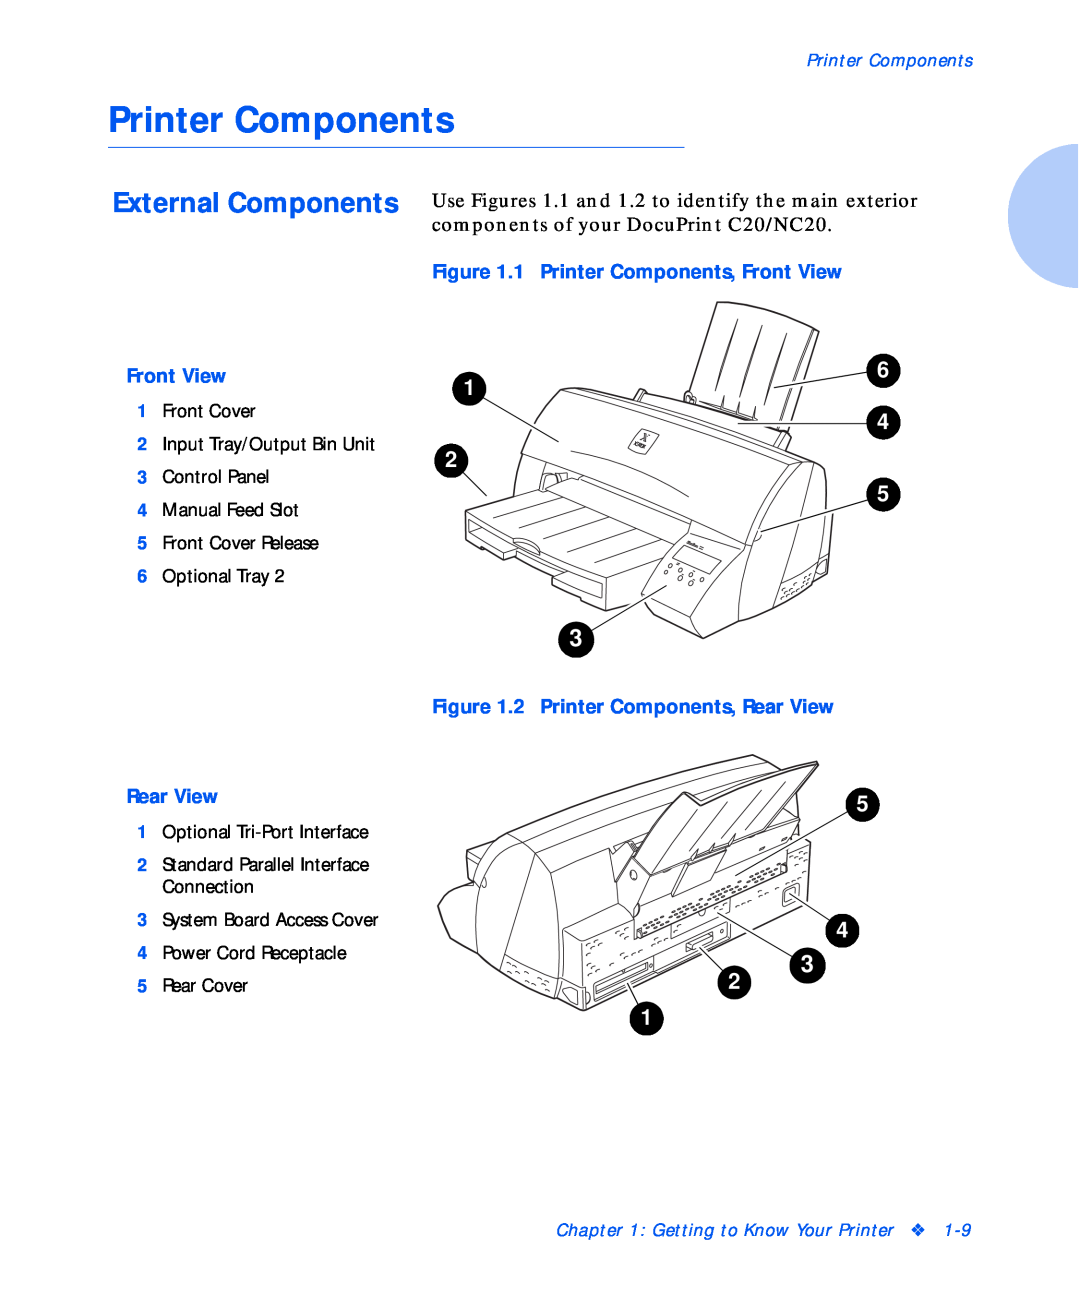 Xerox C20 1 Printer Components, Front View, 2 Printer Components, Rear View, Front Cover, Input Tray/Output Bin Unit 